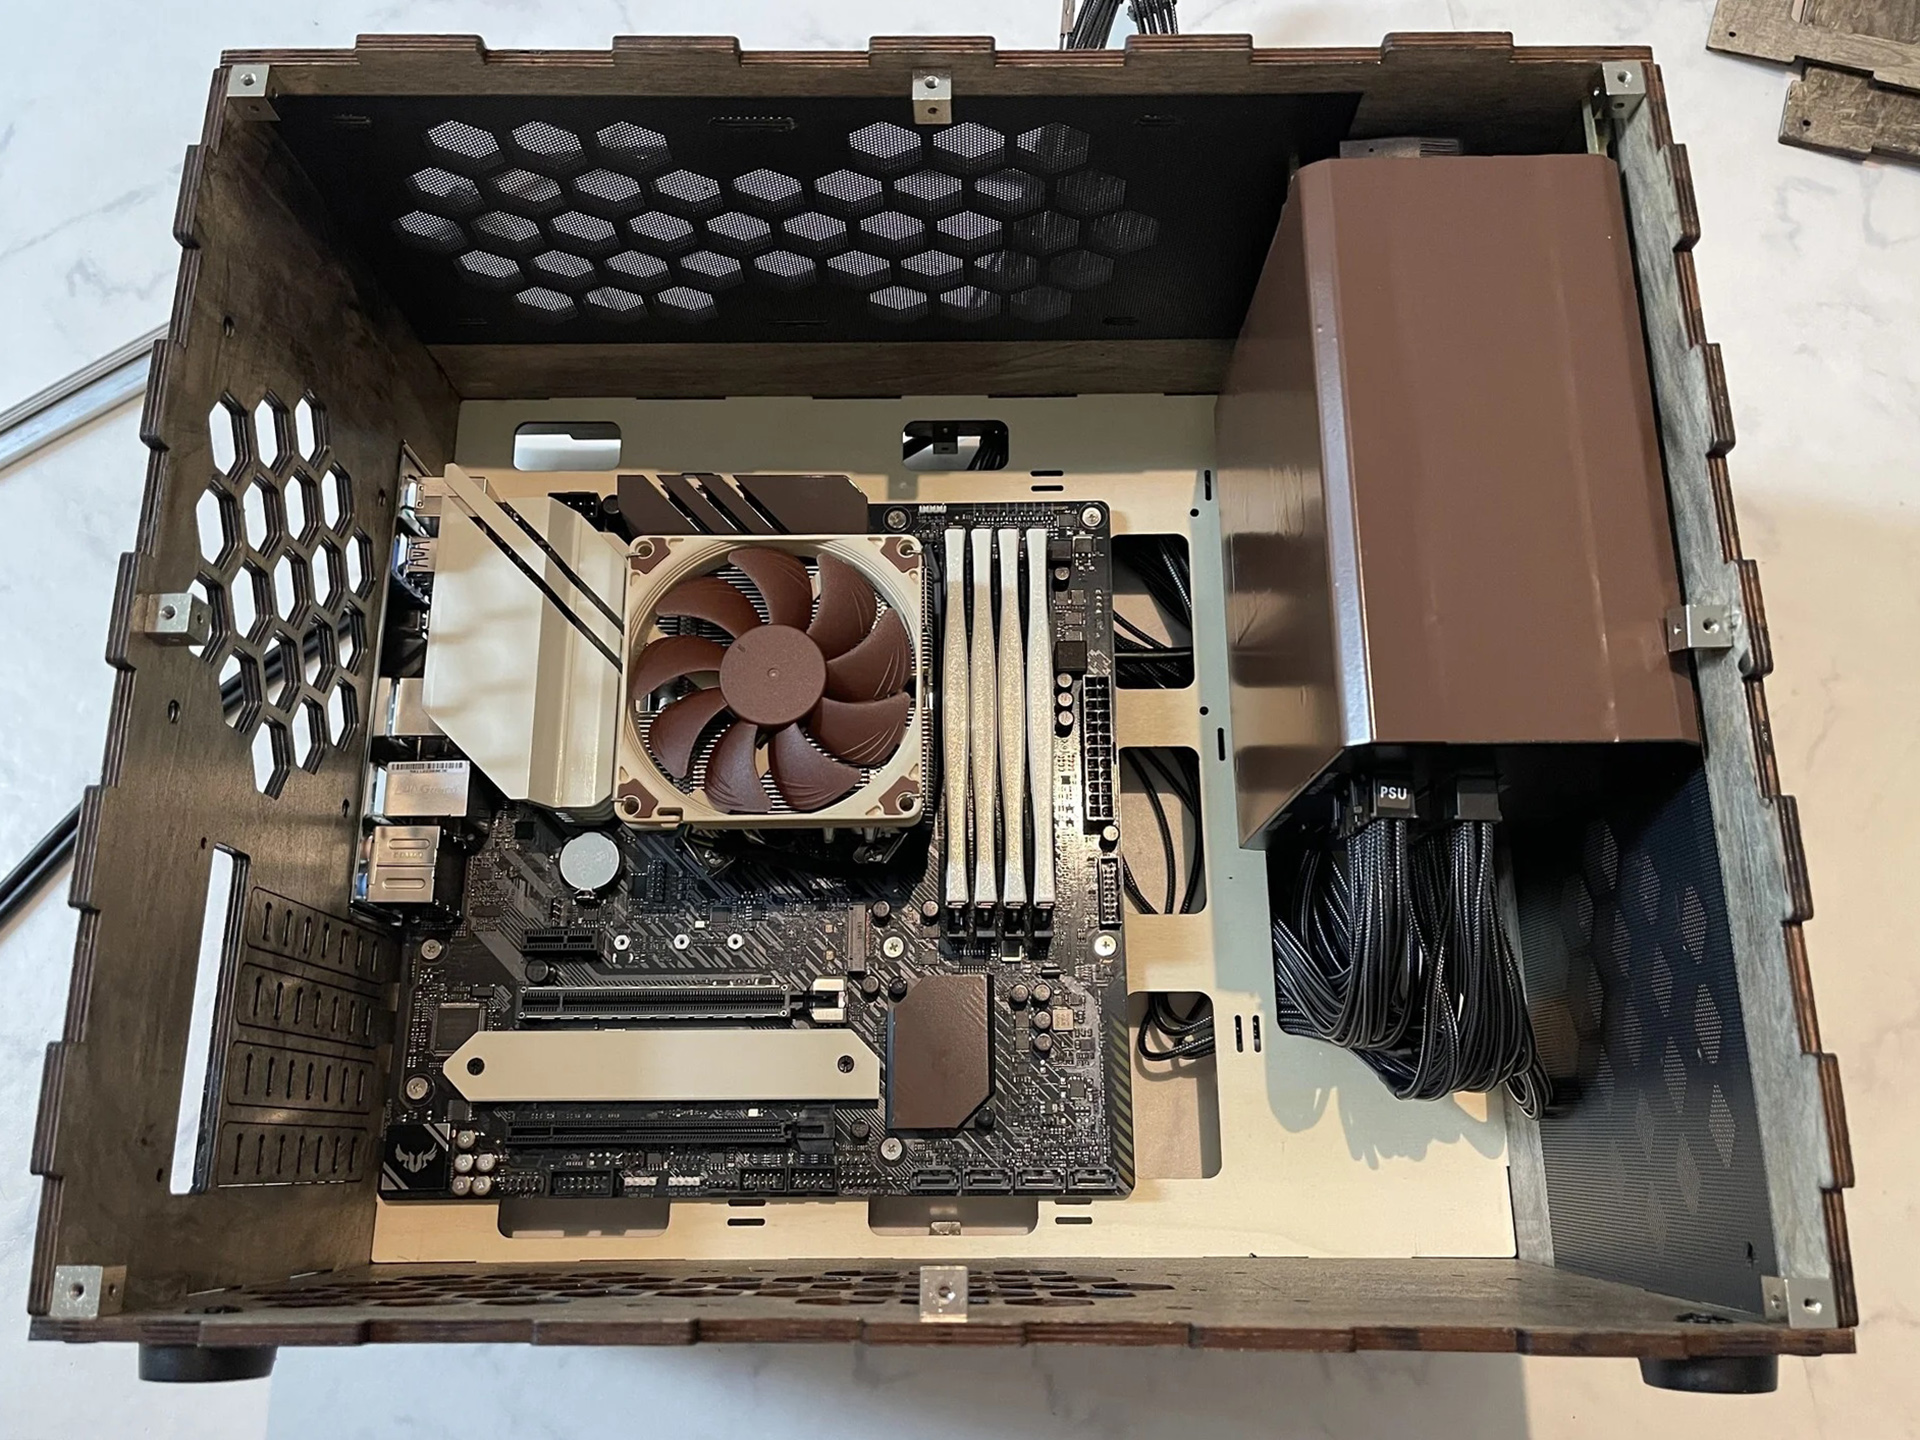 This Noctua-themed gaming PC is a bespoke beauty you can buy